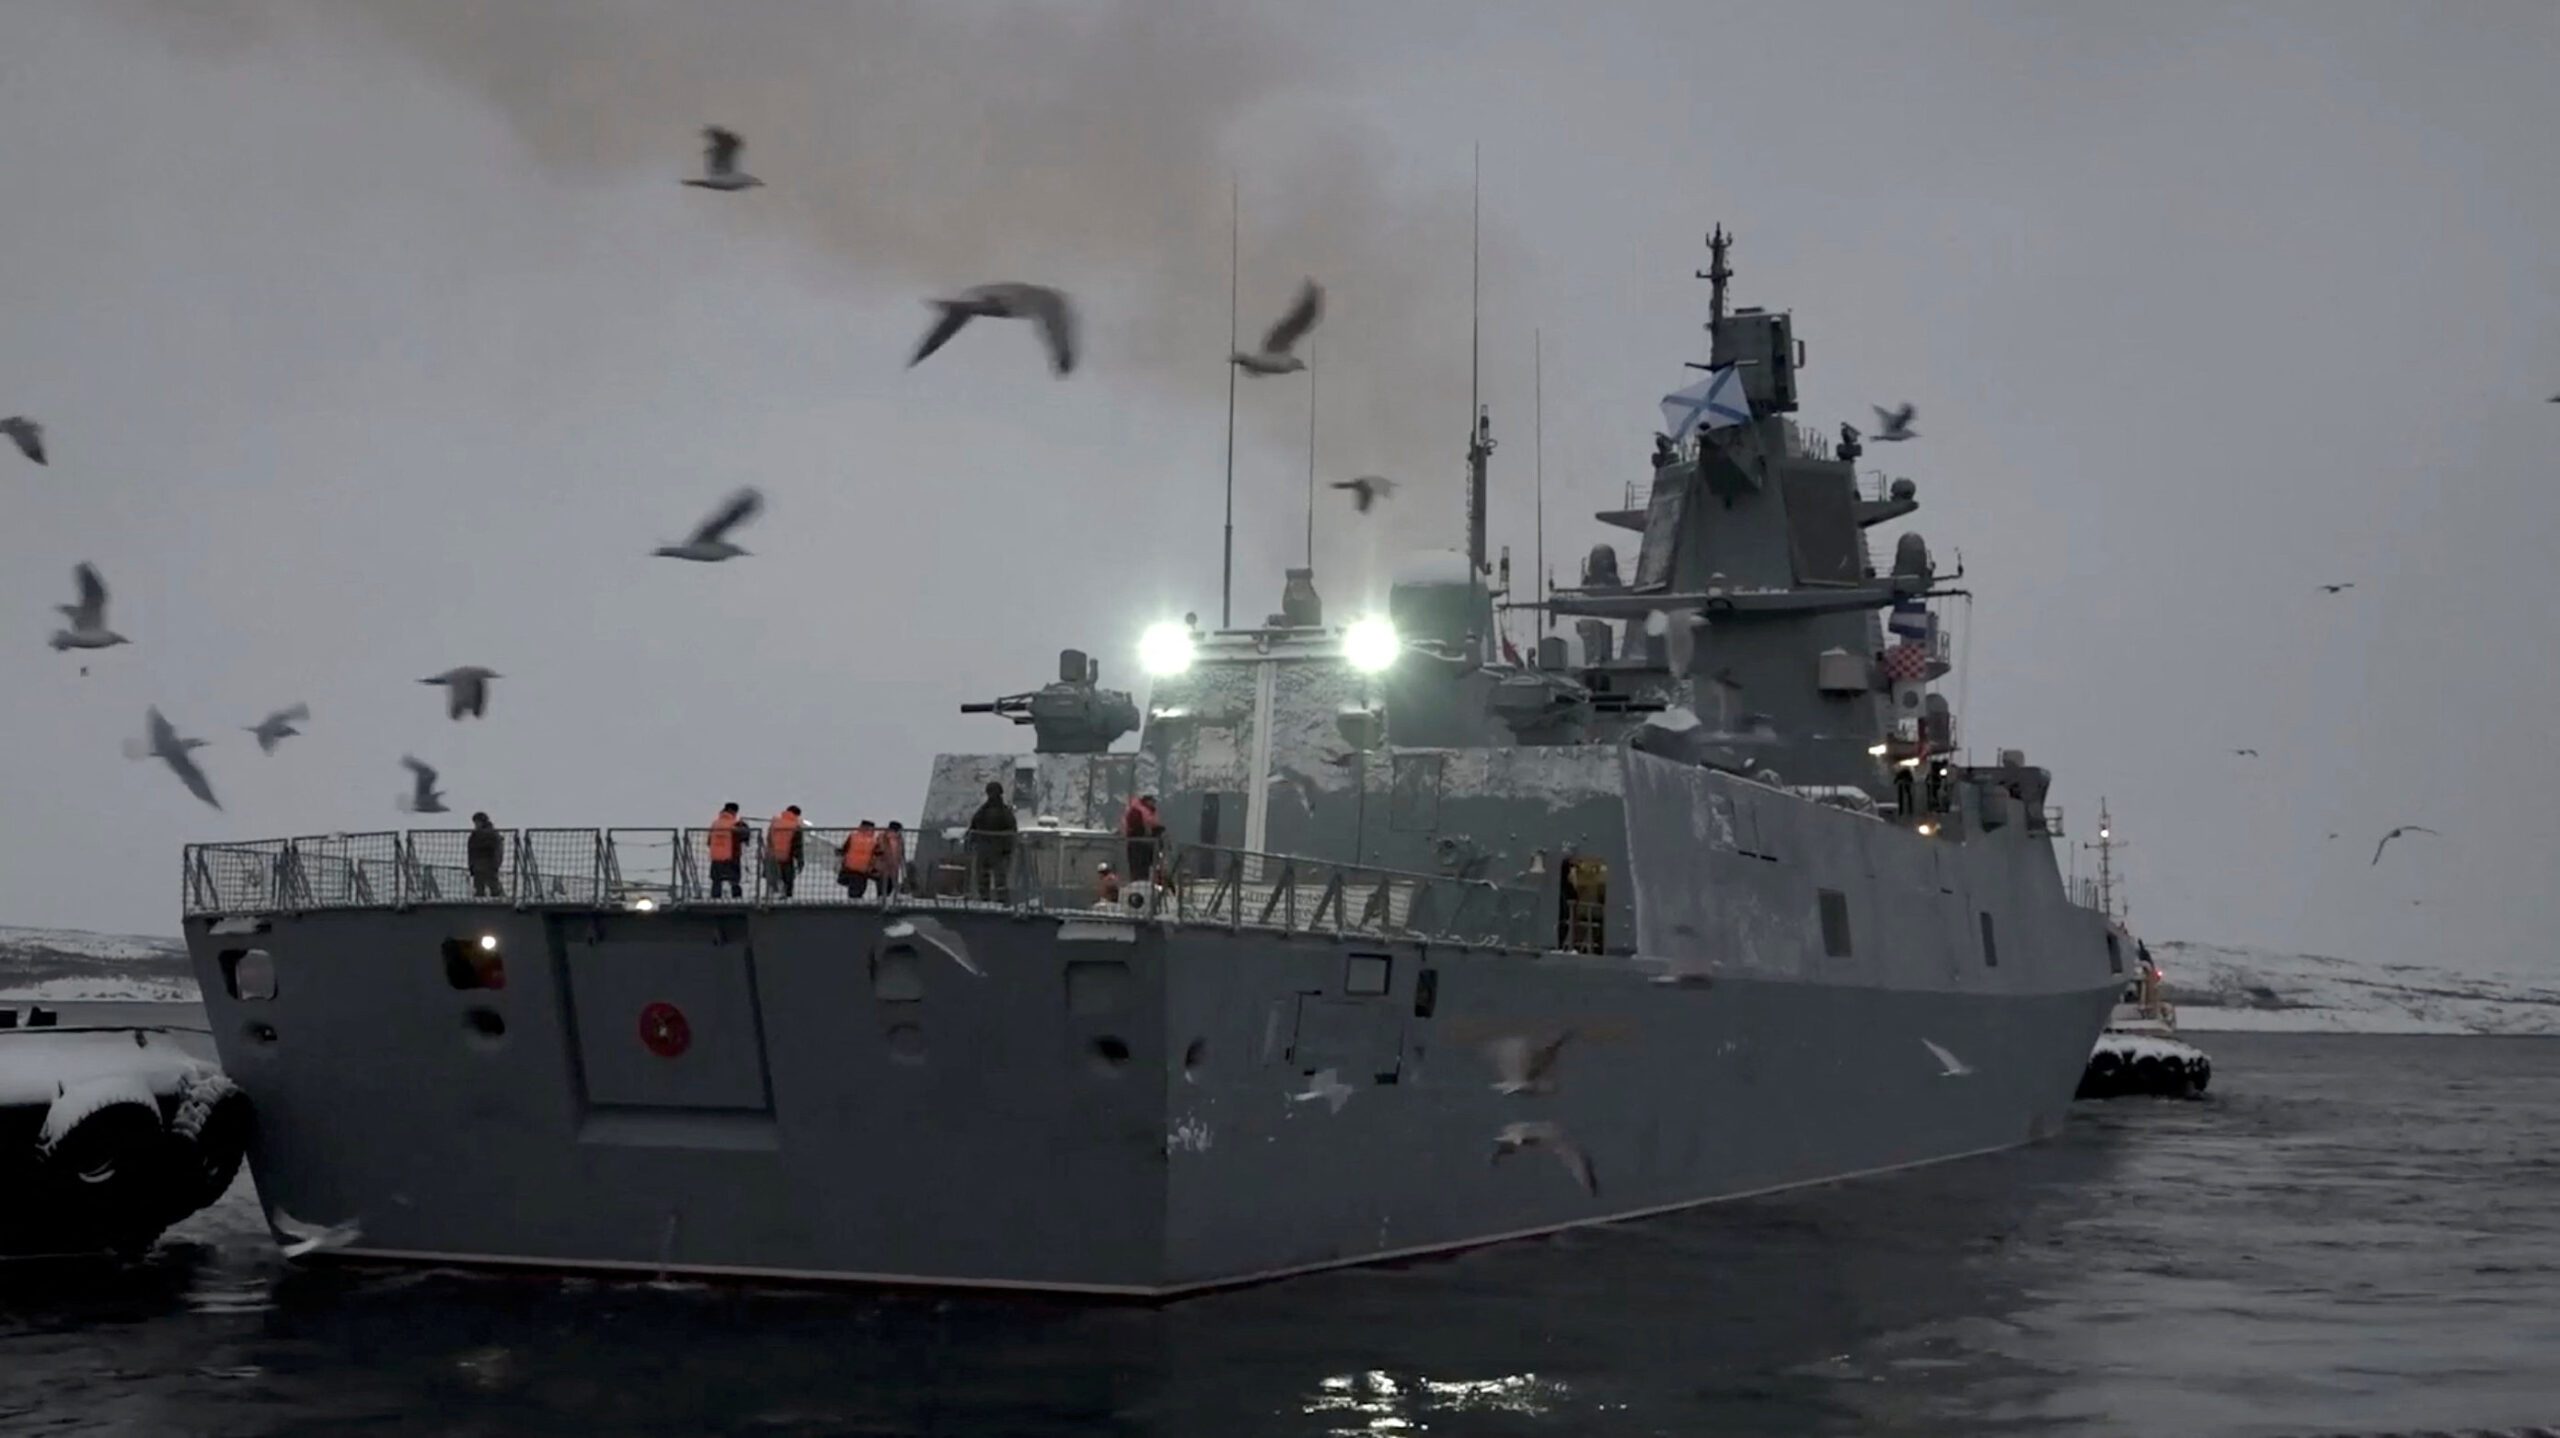 Russian warship armed with hypersonic missiles to join drills with China, South Africa